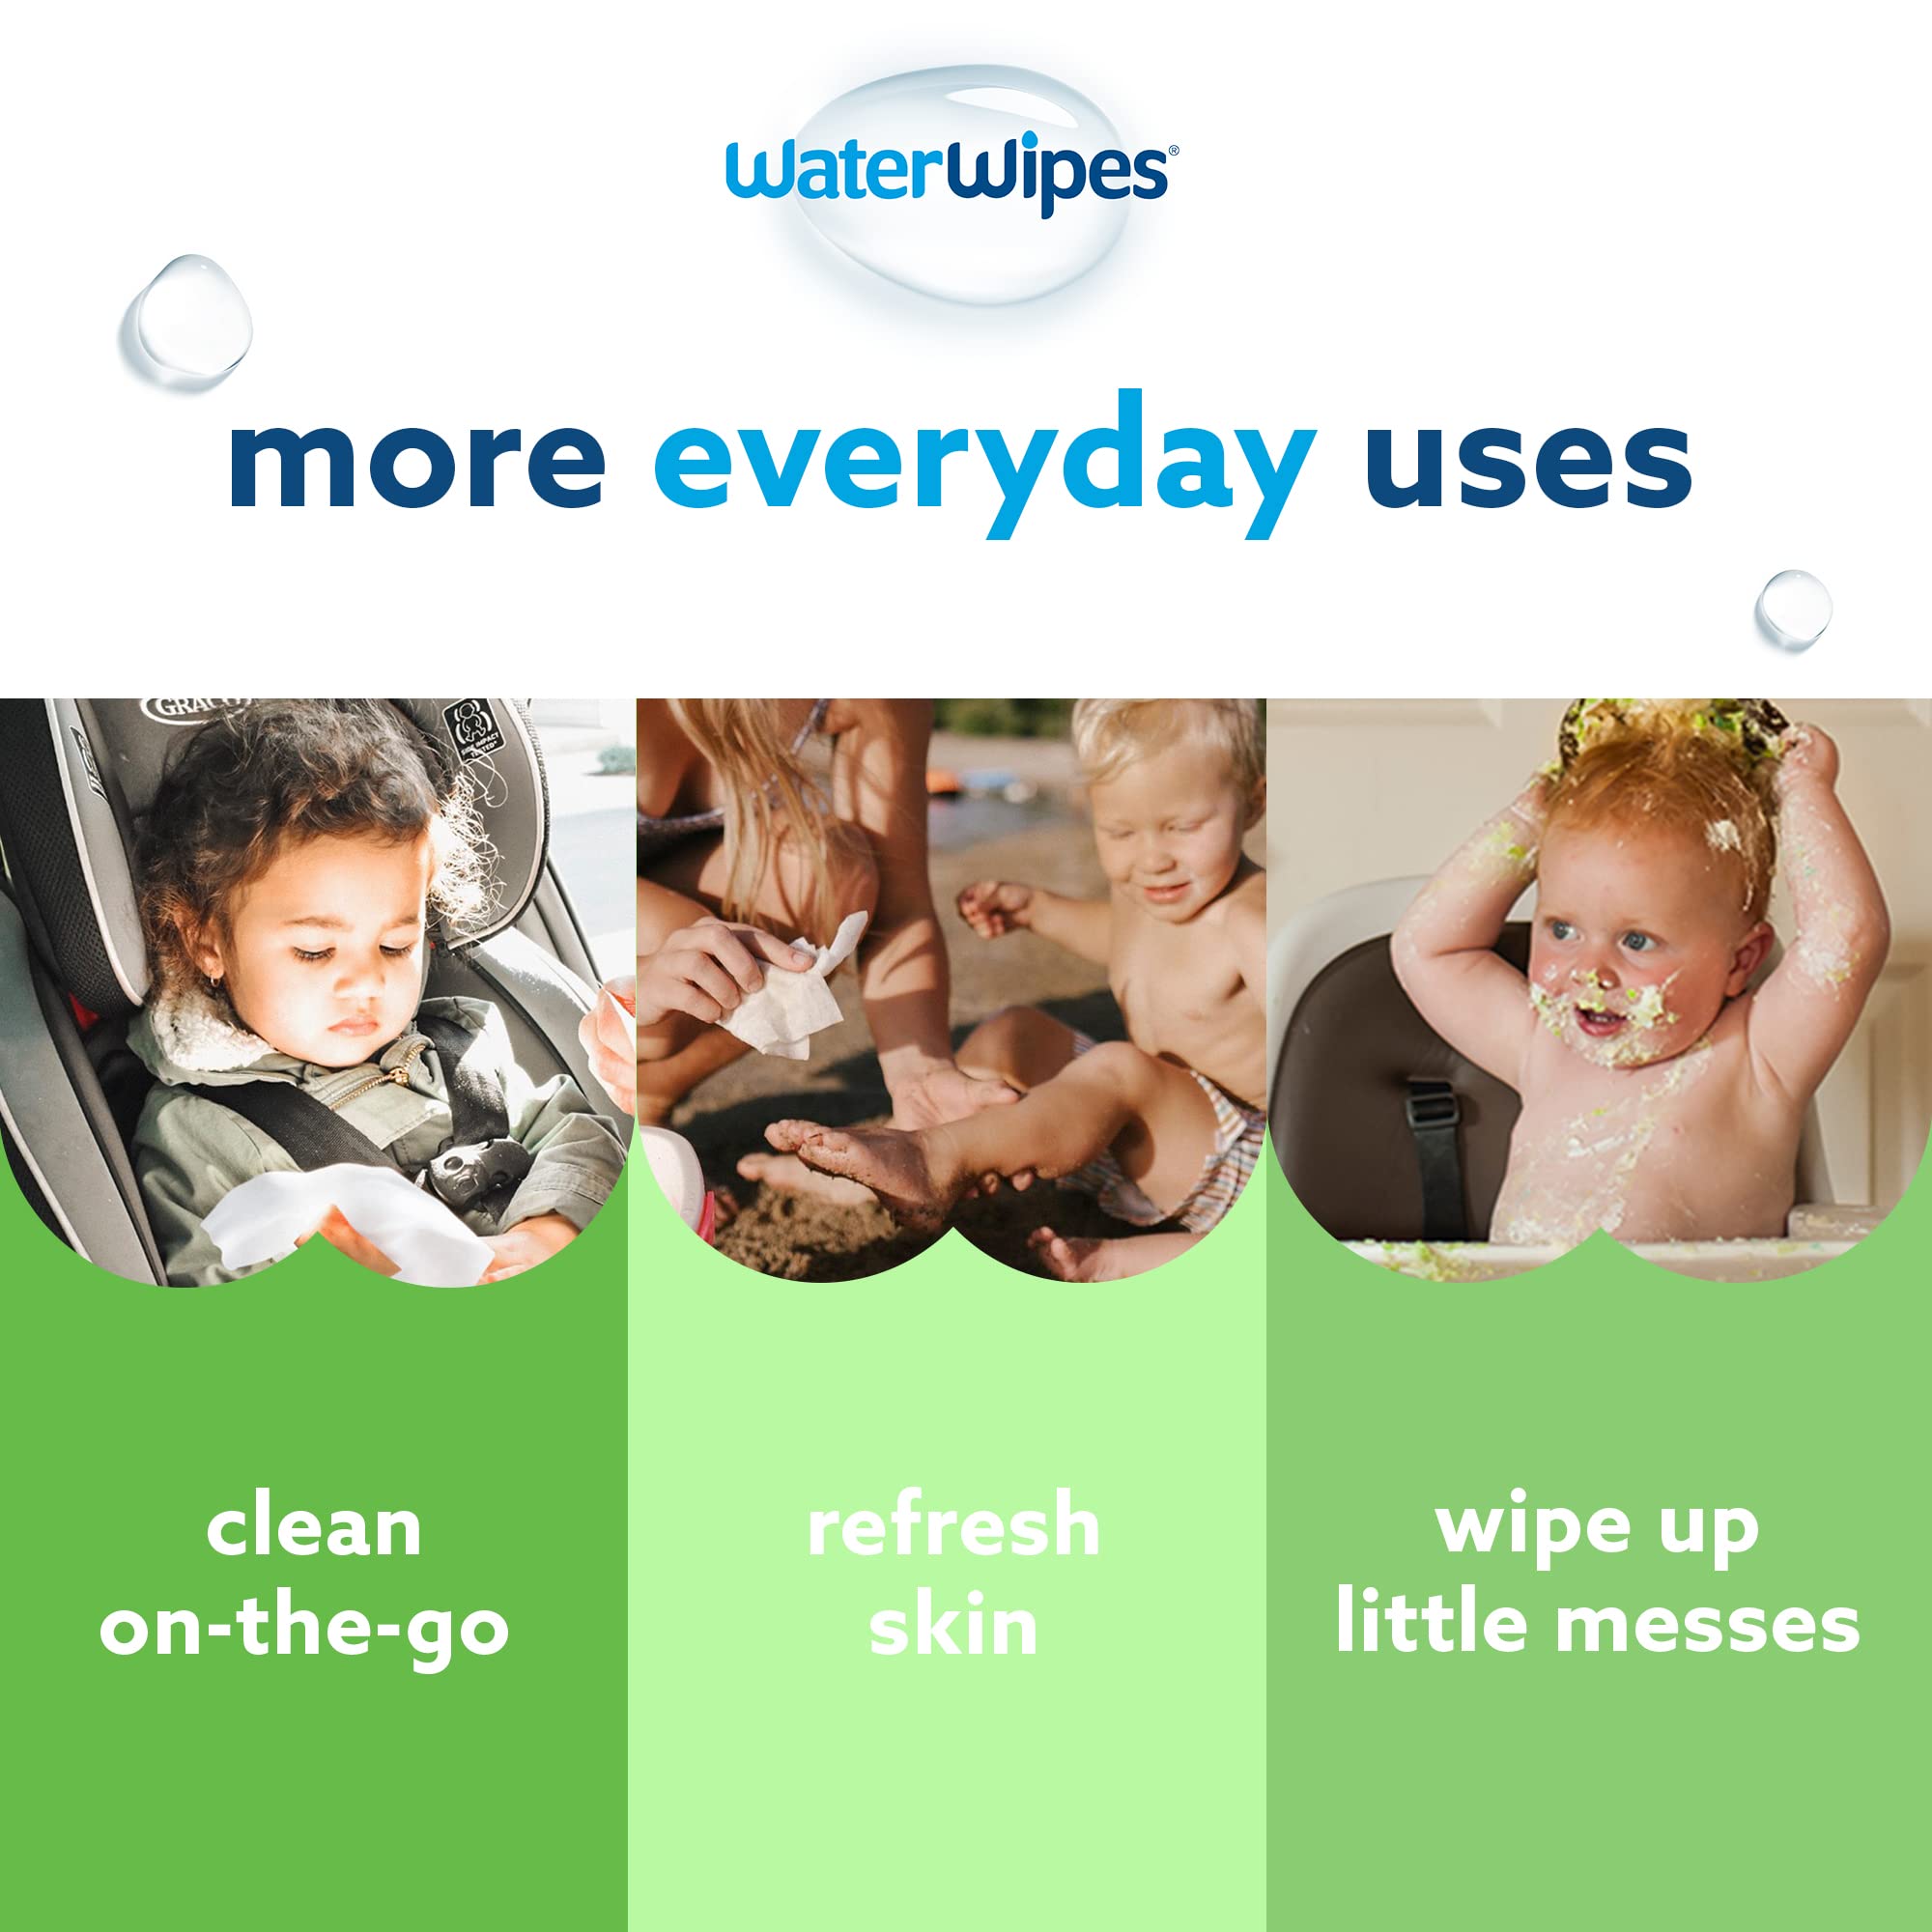 WaterWipes Plastic-Free Textured Clean, Toddler & Baby Wipes, 99.9% Water Based Wipes, Unscented & Hypoallergenic For Sensitive Skin, 540 Count (9 Packs), Packaging May Vary